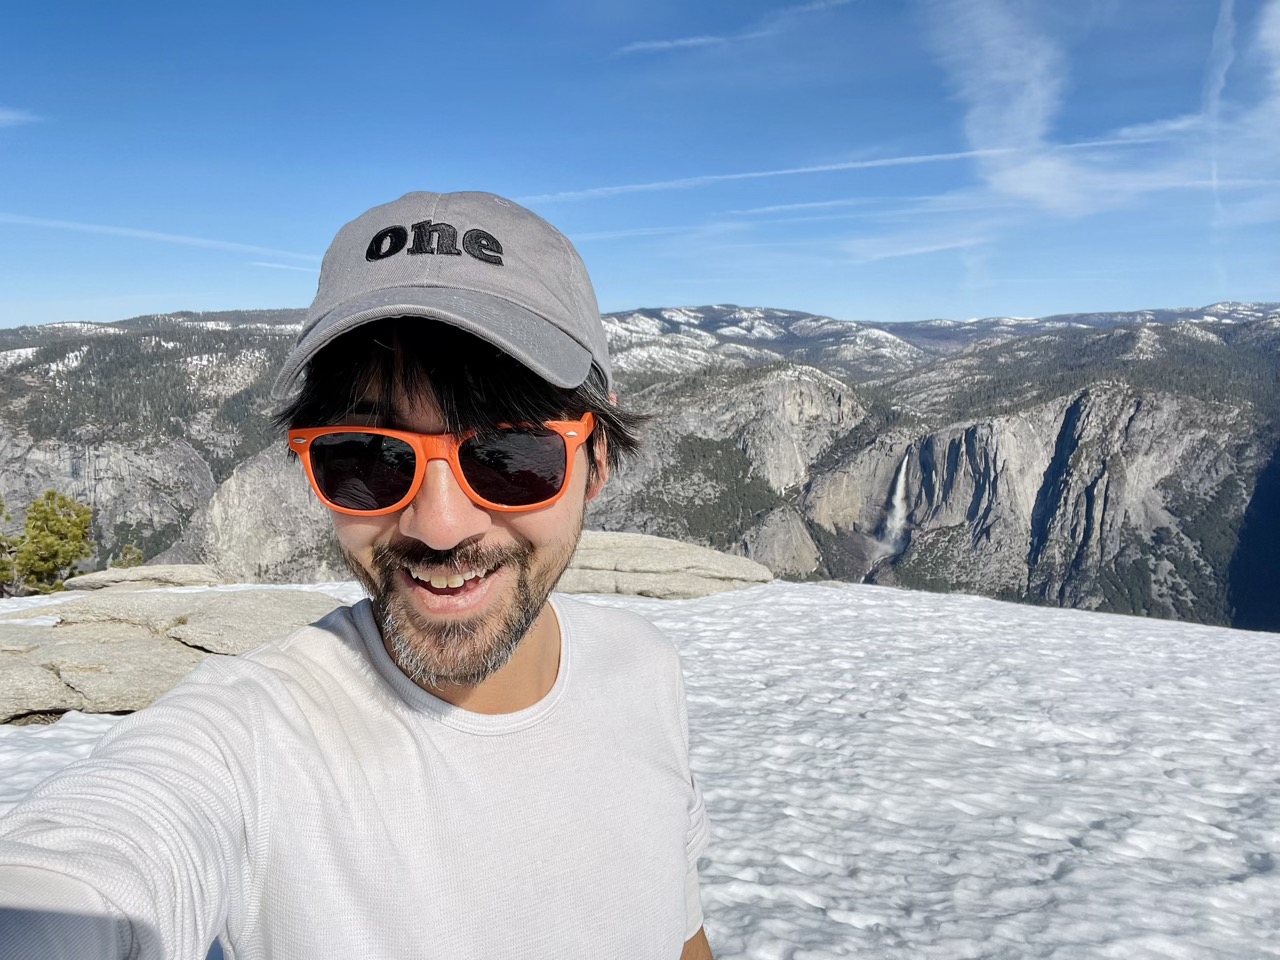 On top of Sentinel Dome in Yosemite